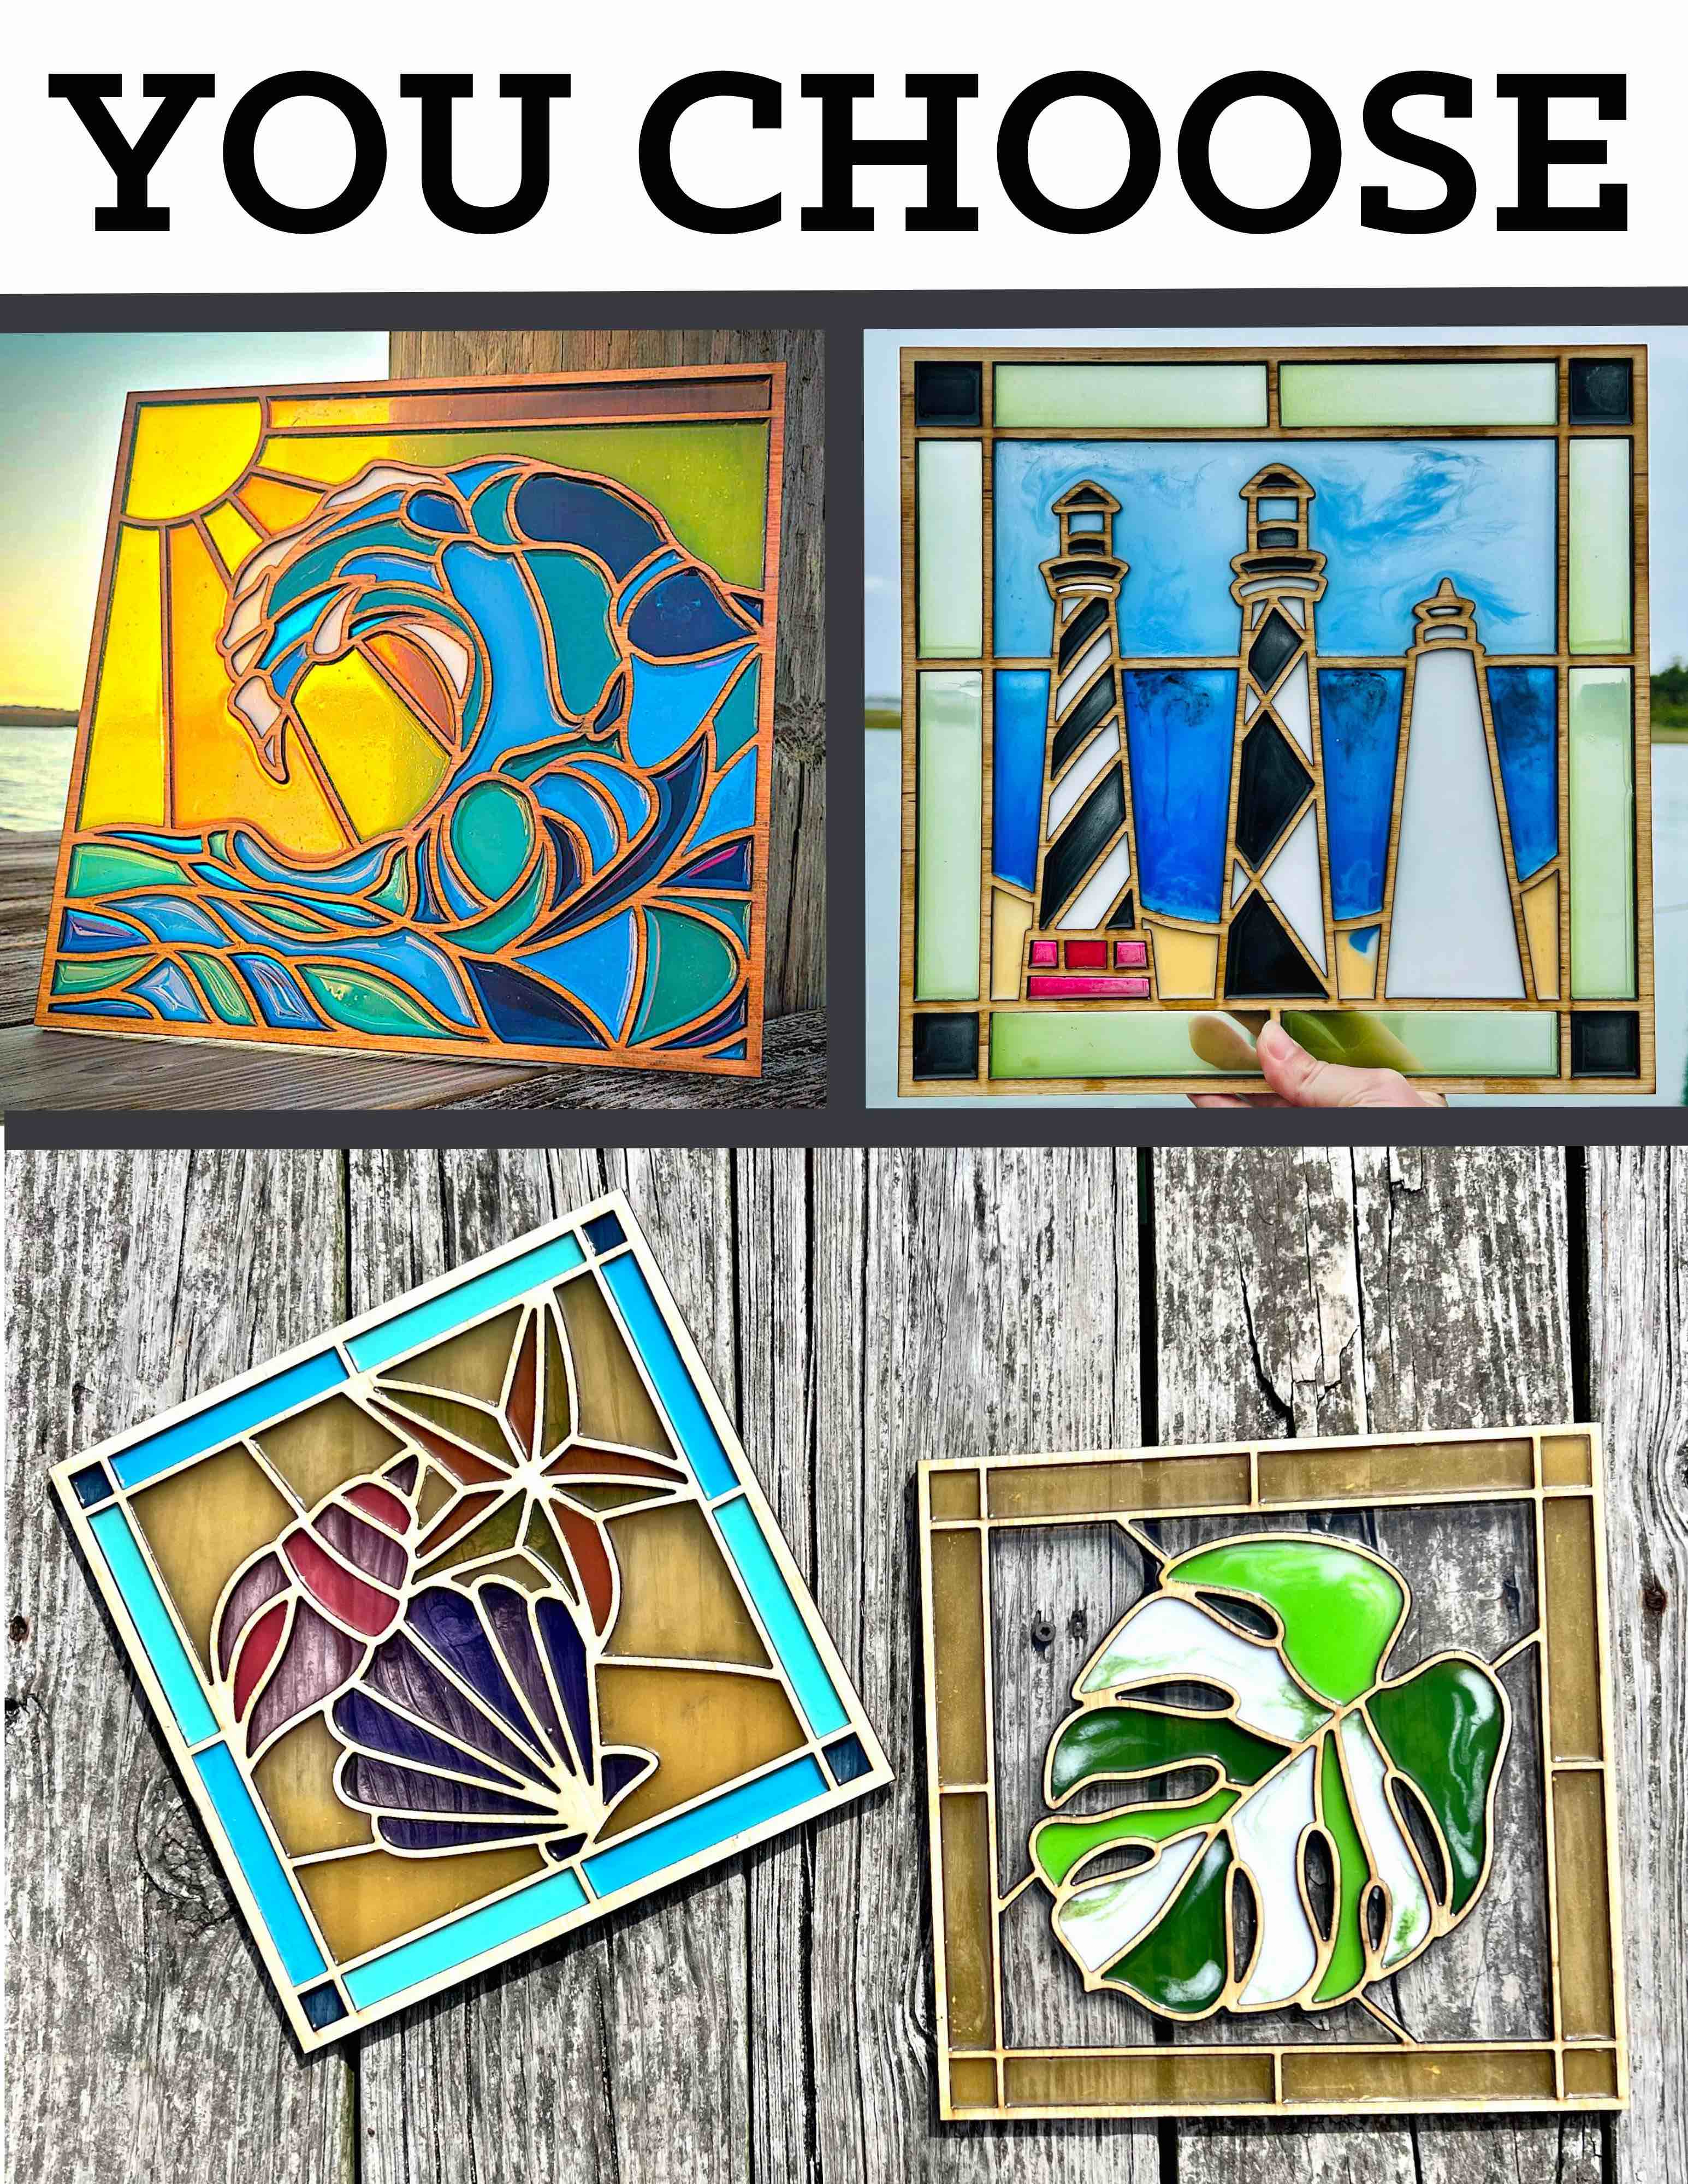 YOU CHOOSE! Coastal Faux Stained Glass Workshop | 6:30pm